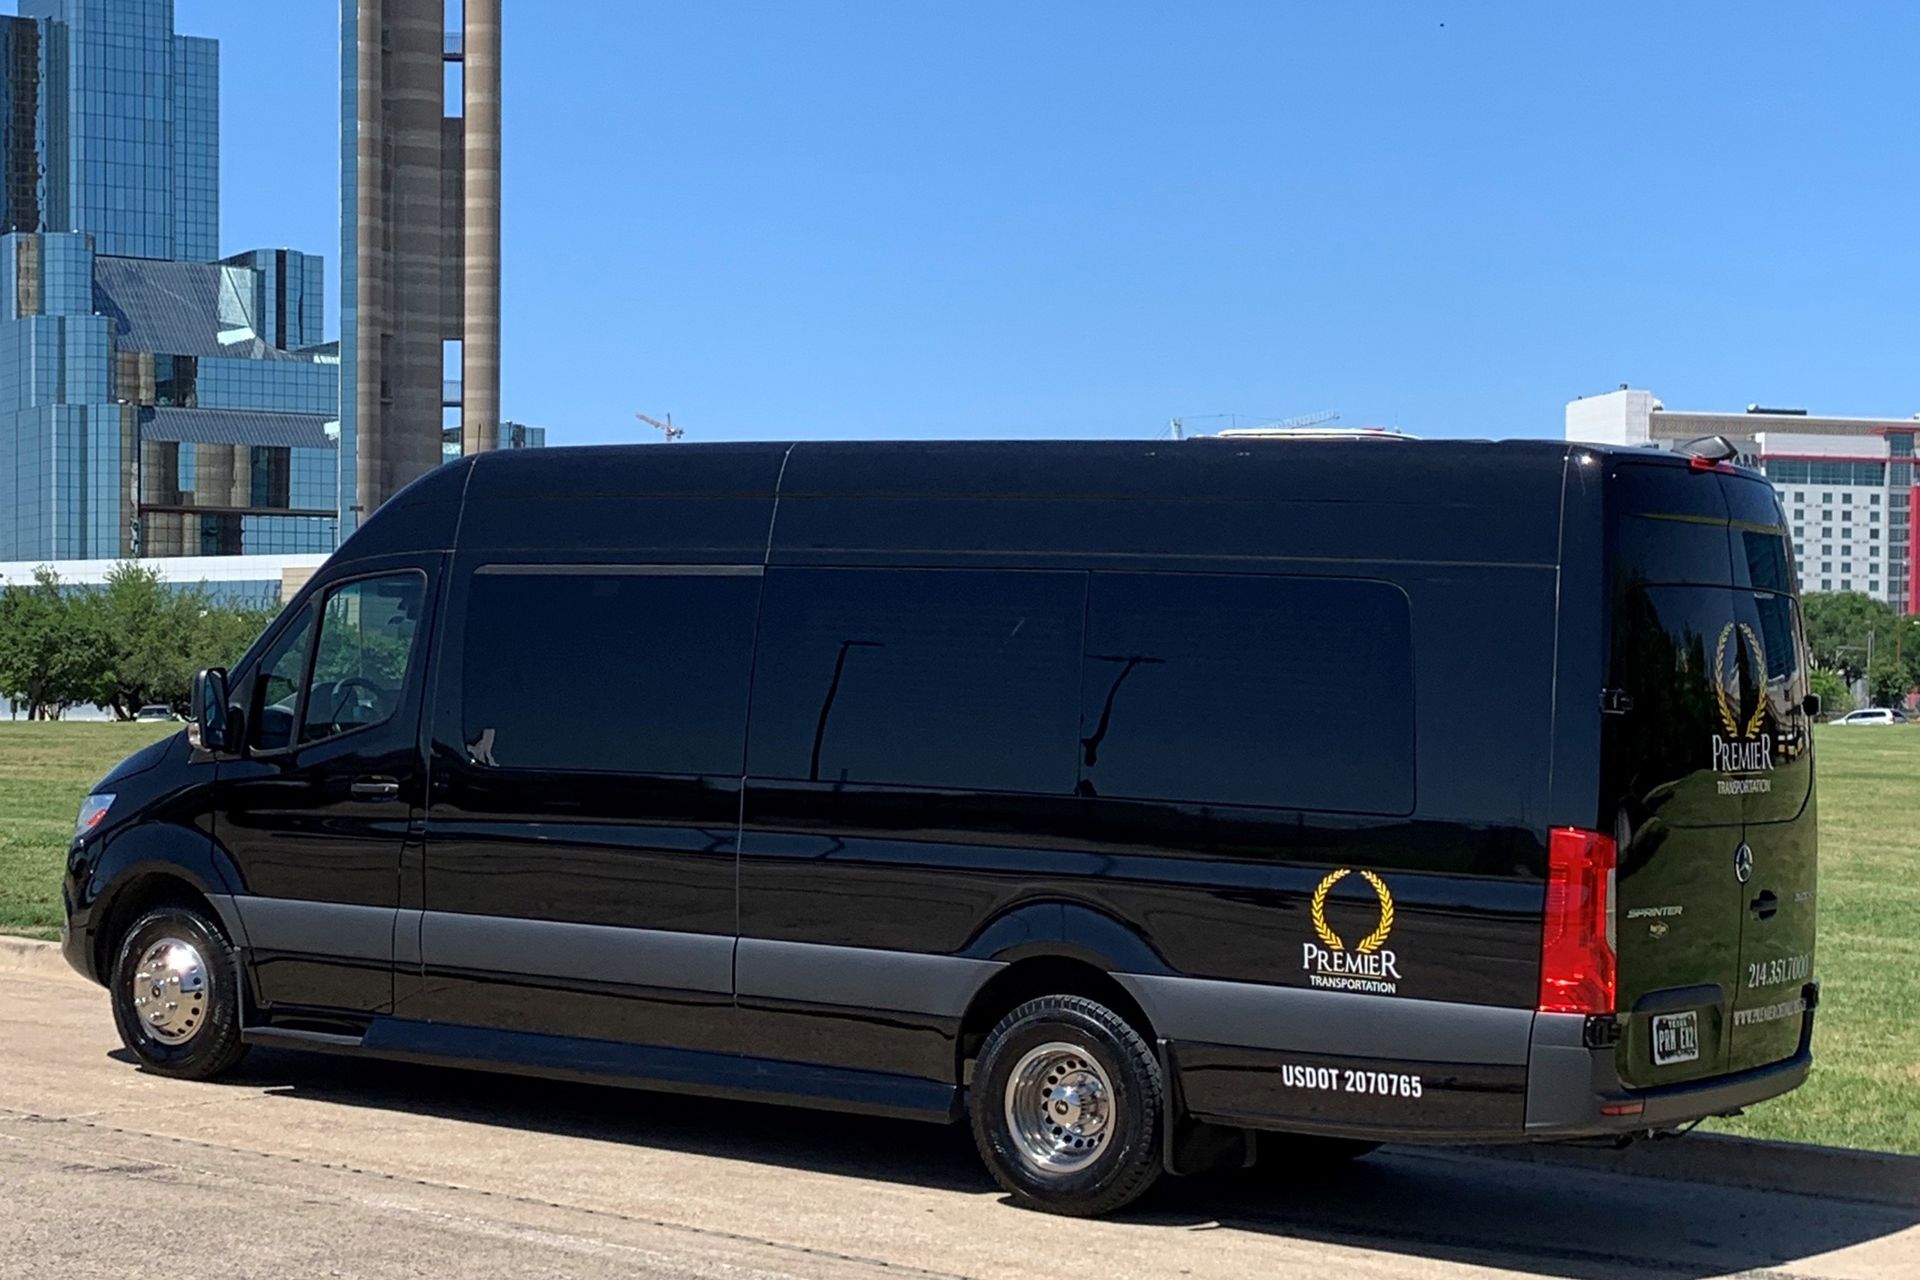 premier's black van is parked on the side of the road in front of a tall building .